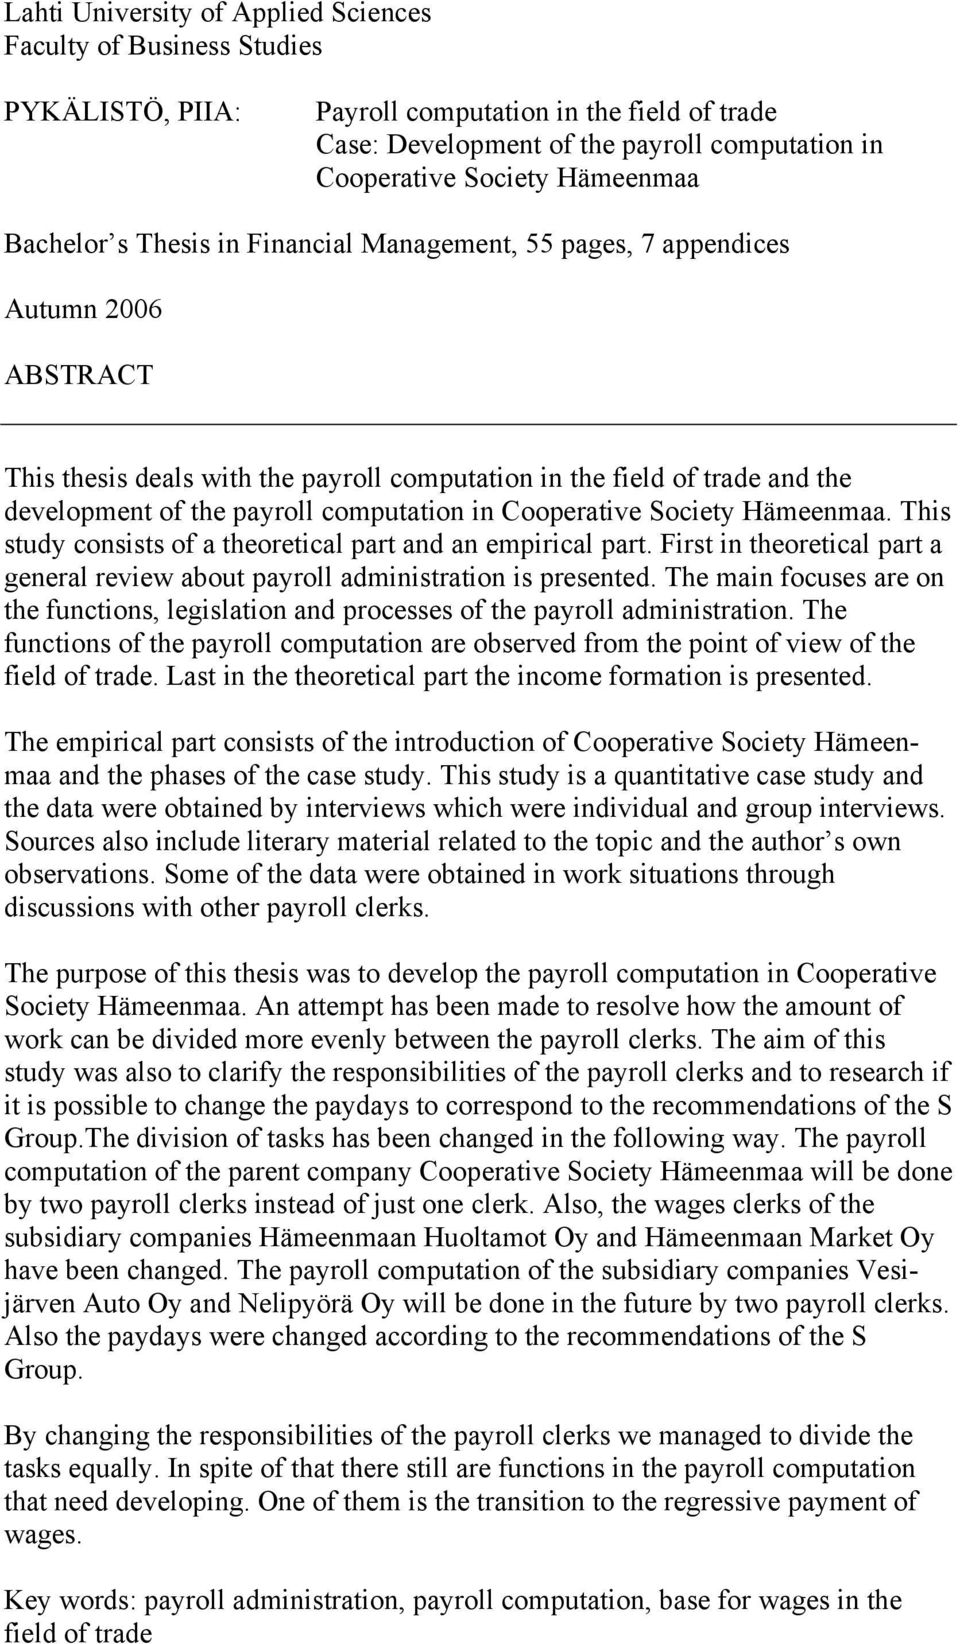 payroll computation in Cooperative Society Hämeenmaa. This study consists of a theoretical part and an empirical part.